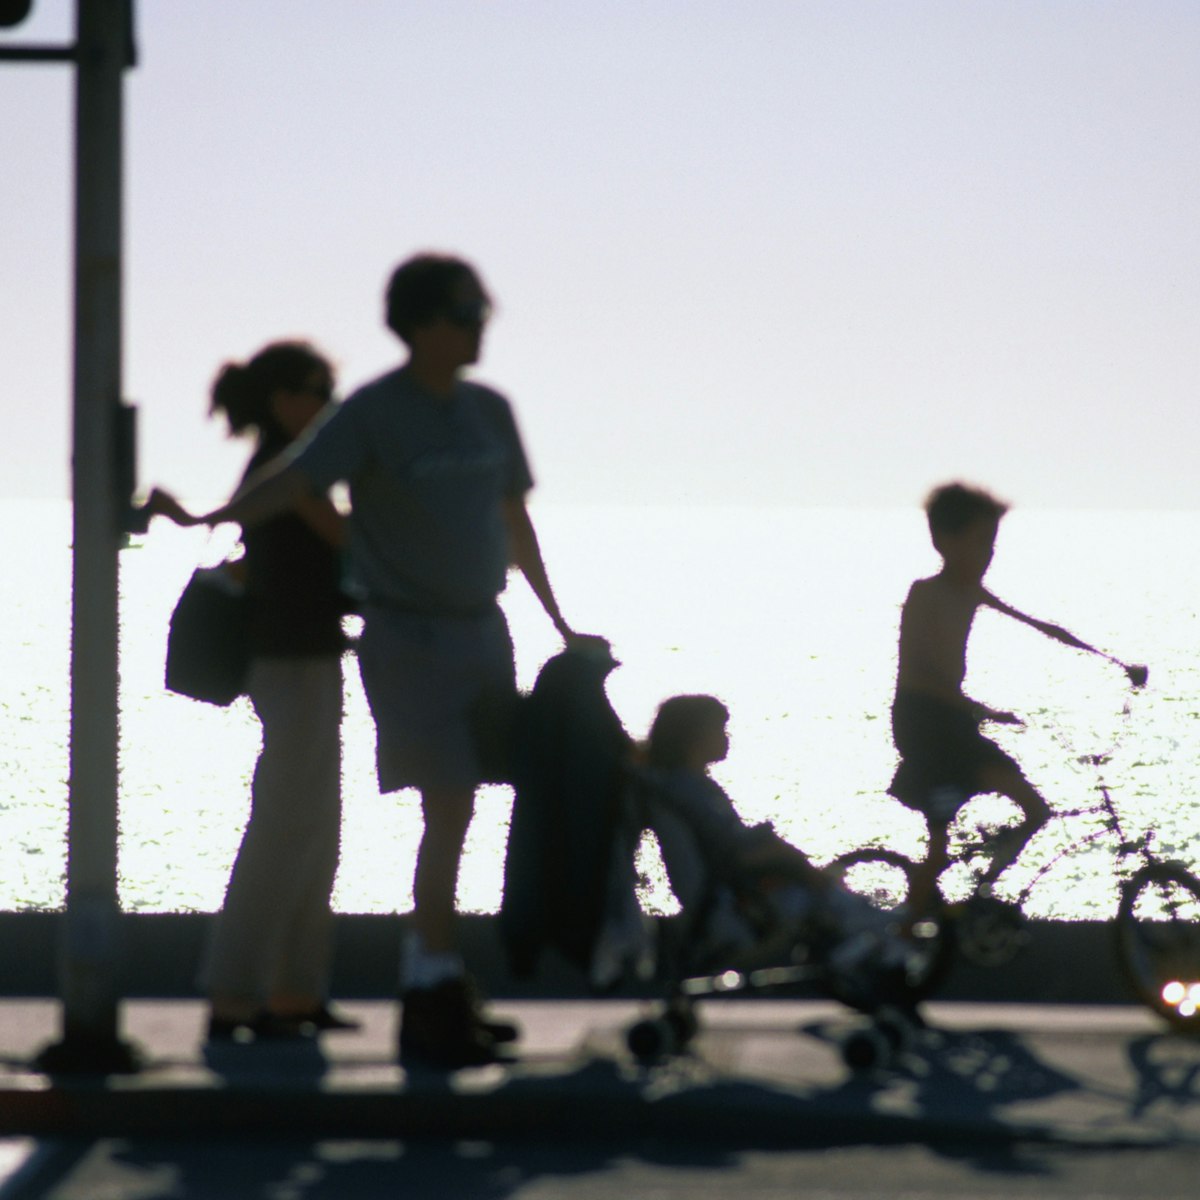 A family takes an early evening stroll along Redondo Beach in Los Angeles.